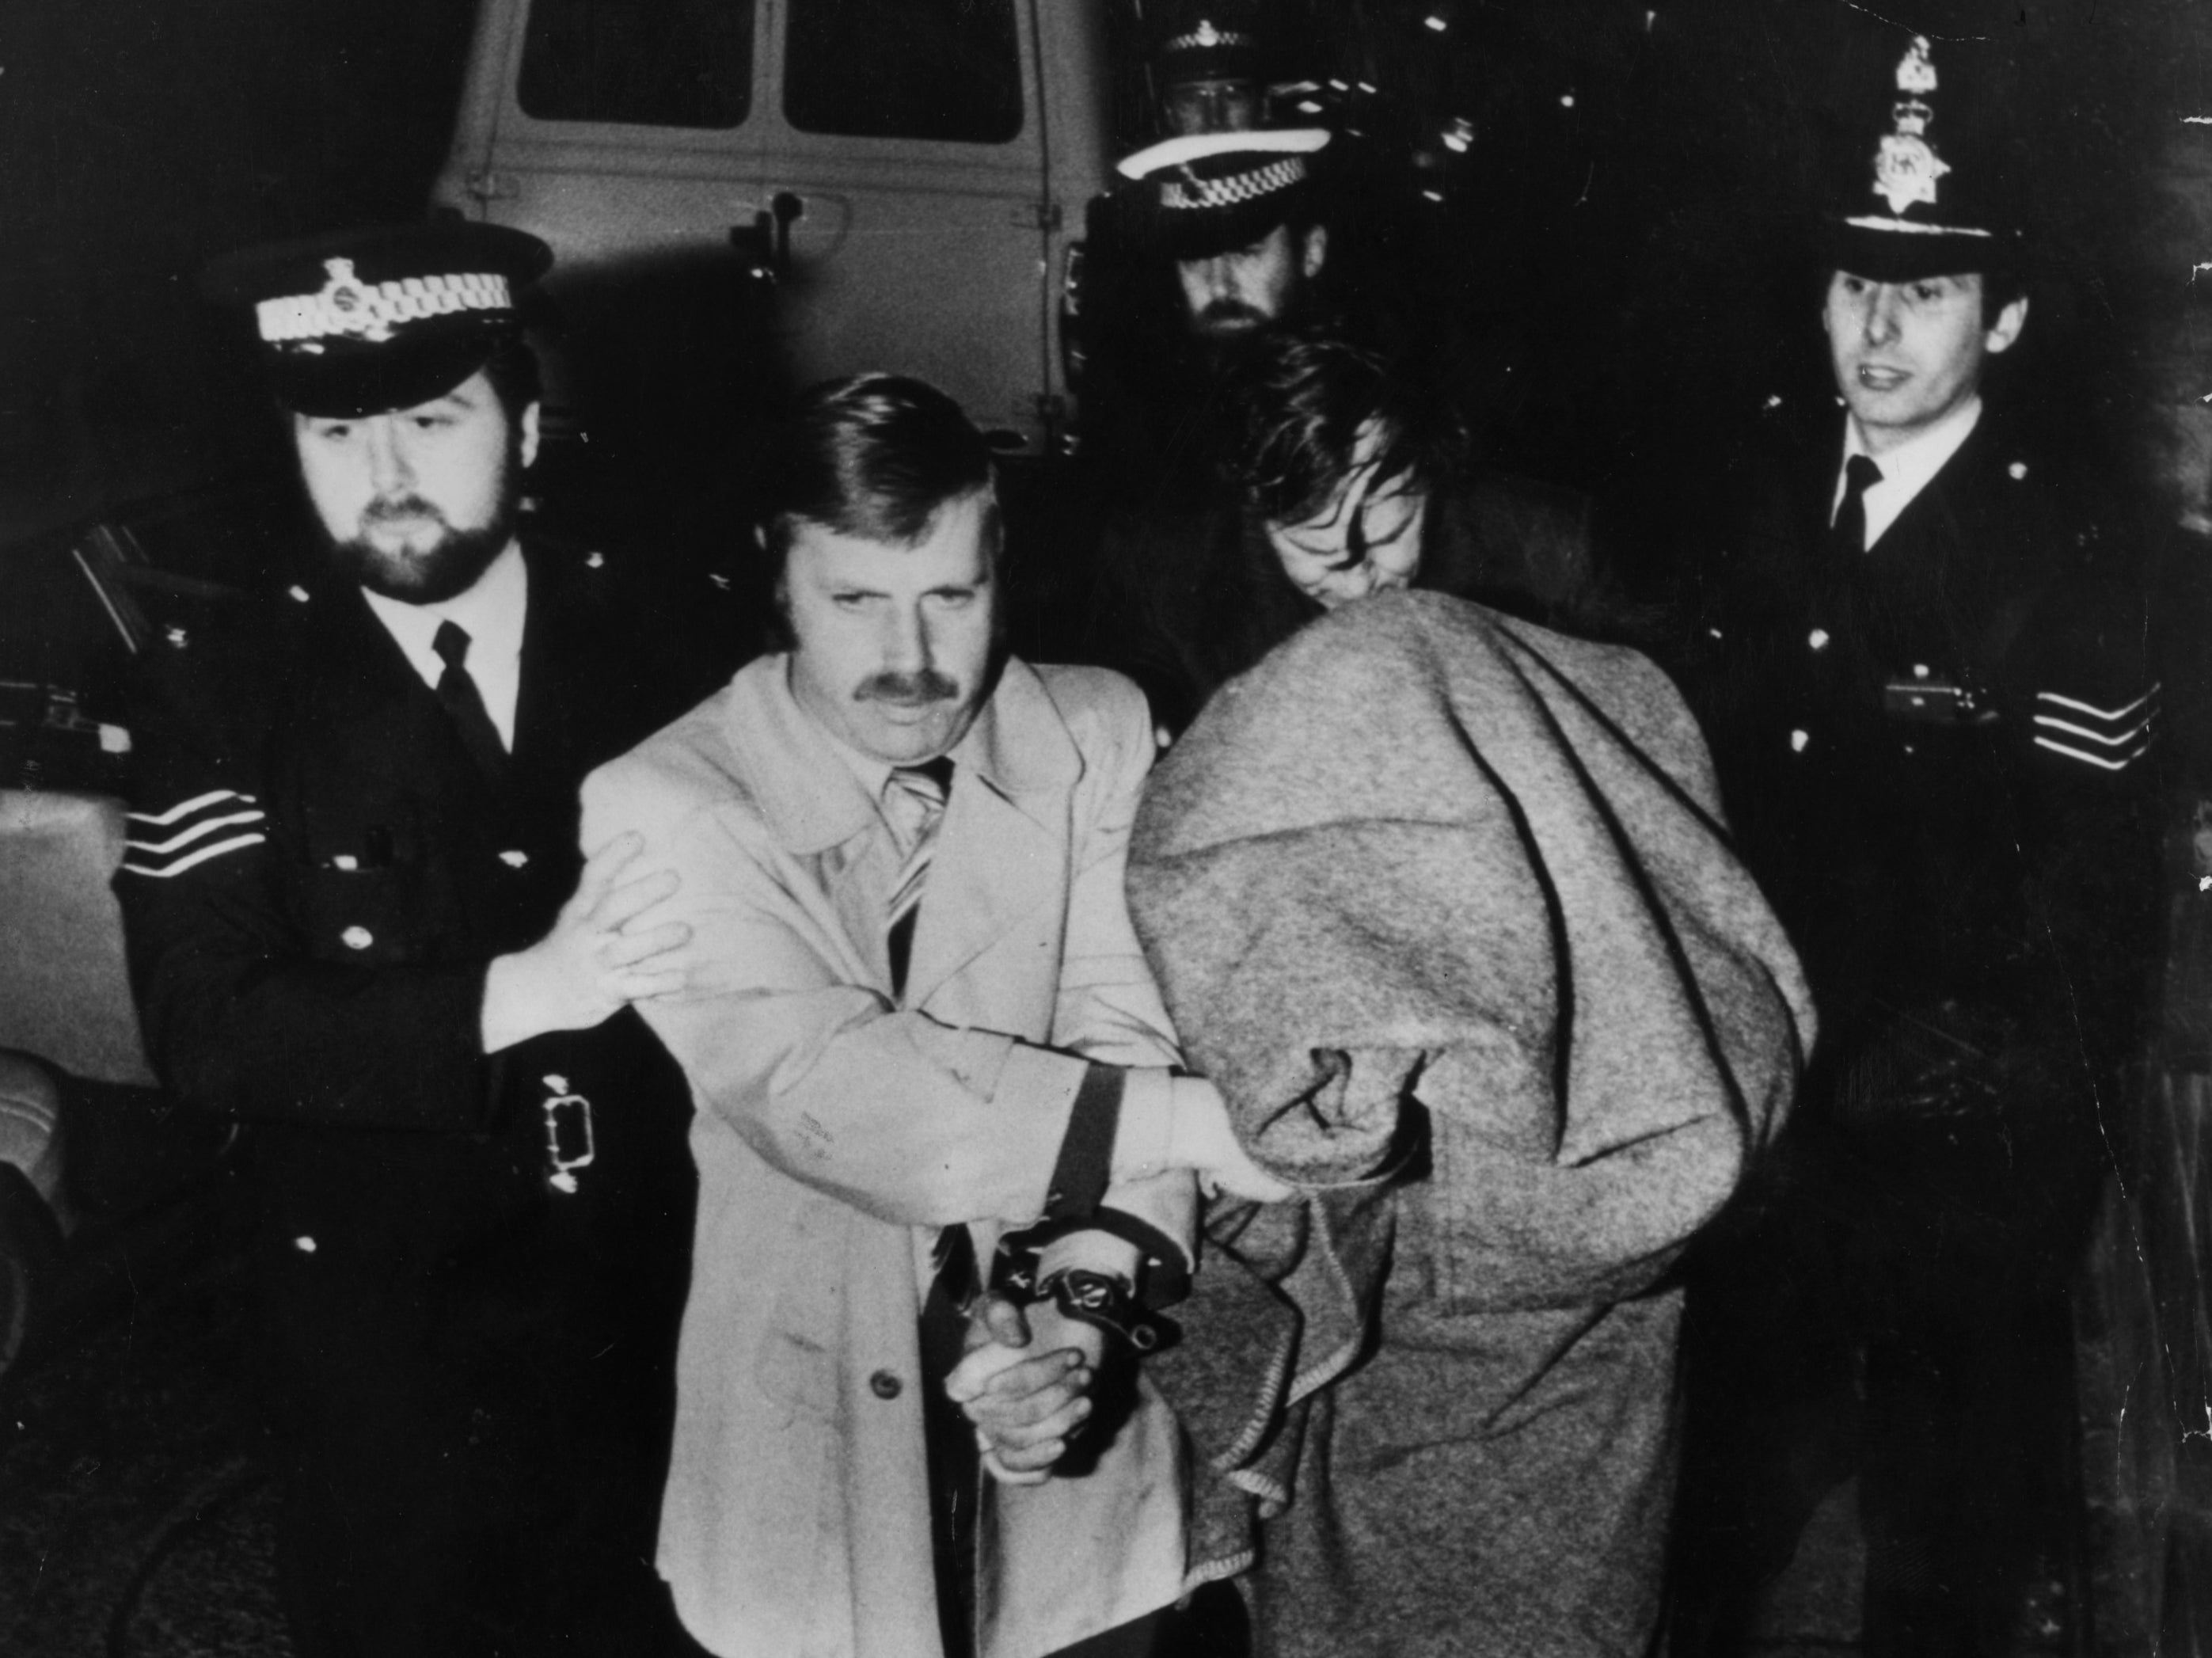 Peter Sutcliffe, aka The Yorkshire Ripper, is brought into Dewsbury Court under a blanket